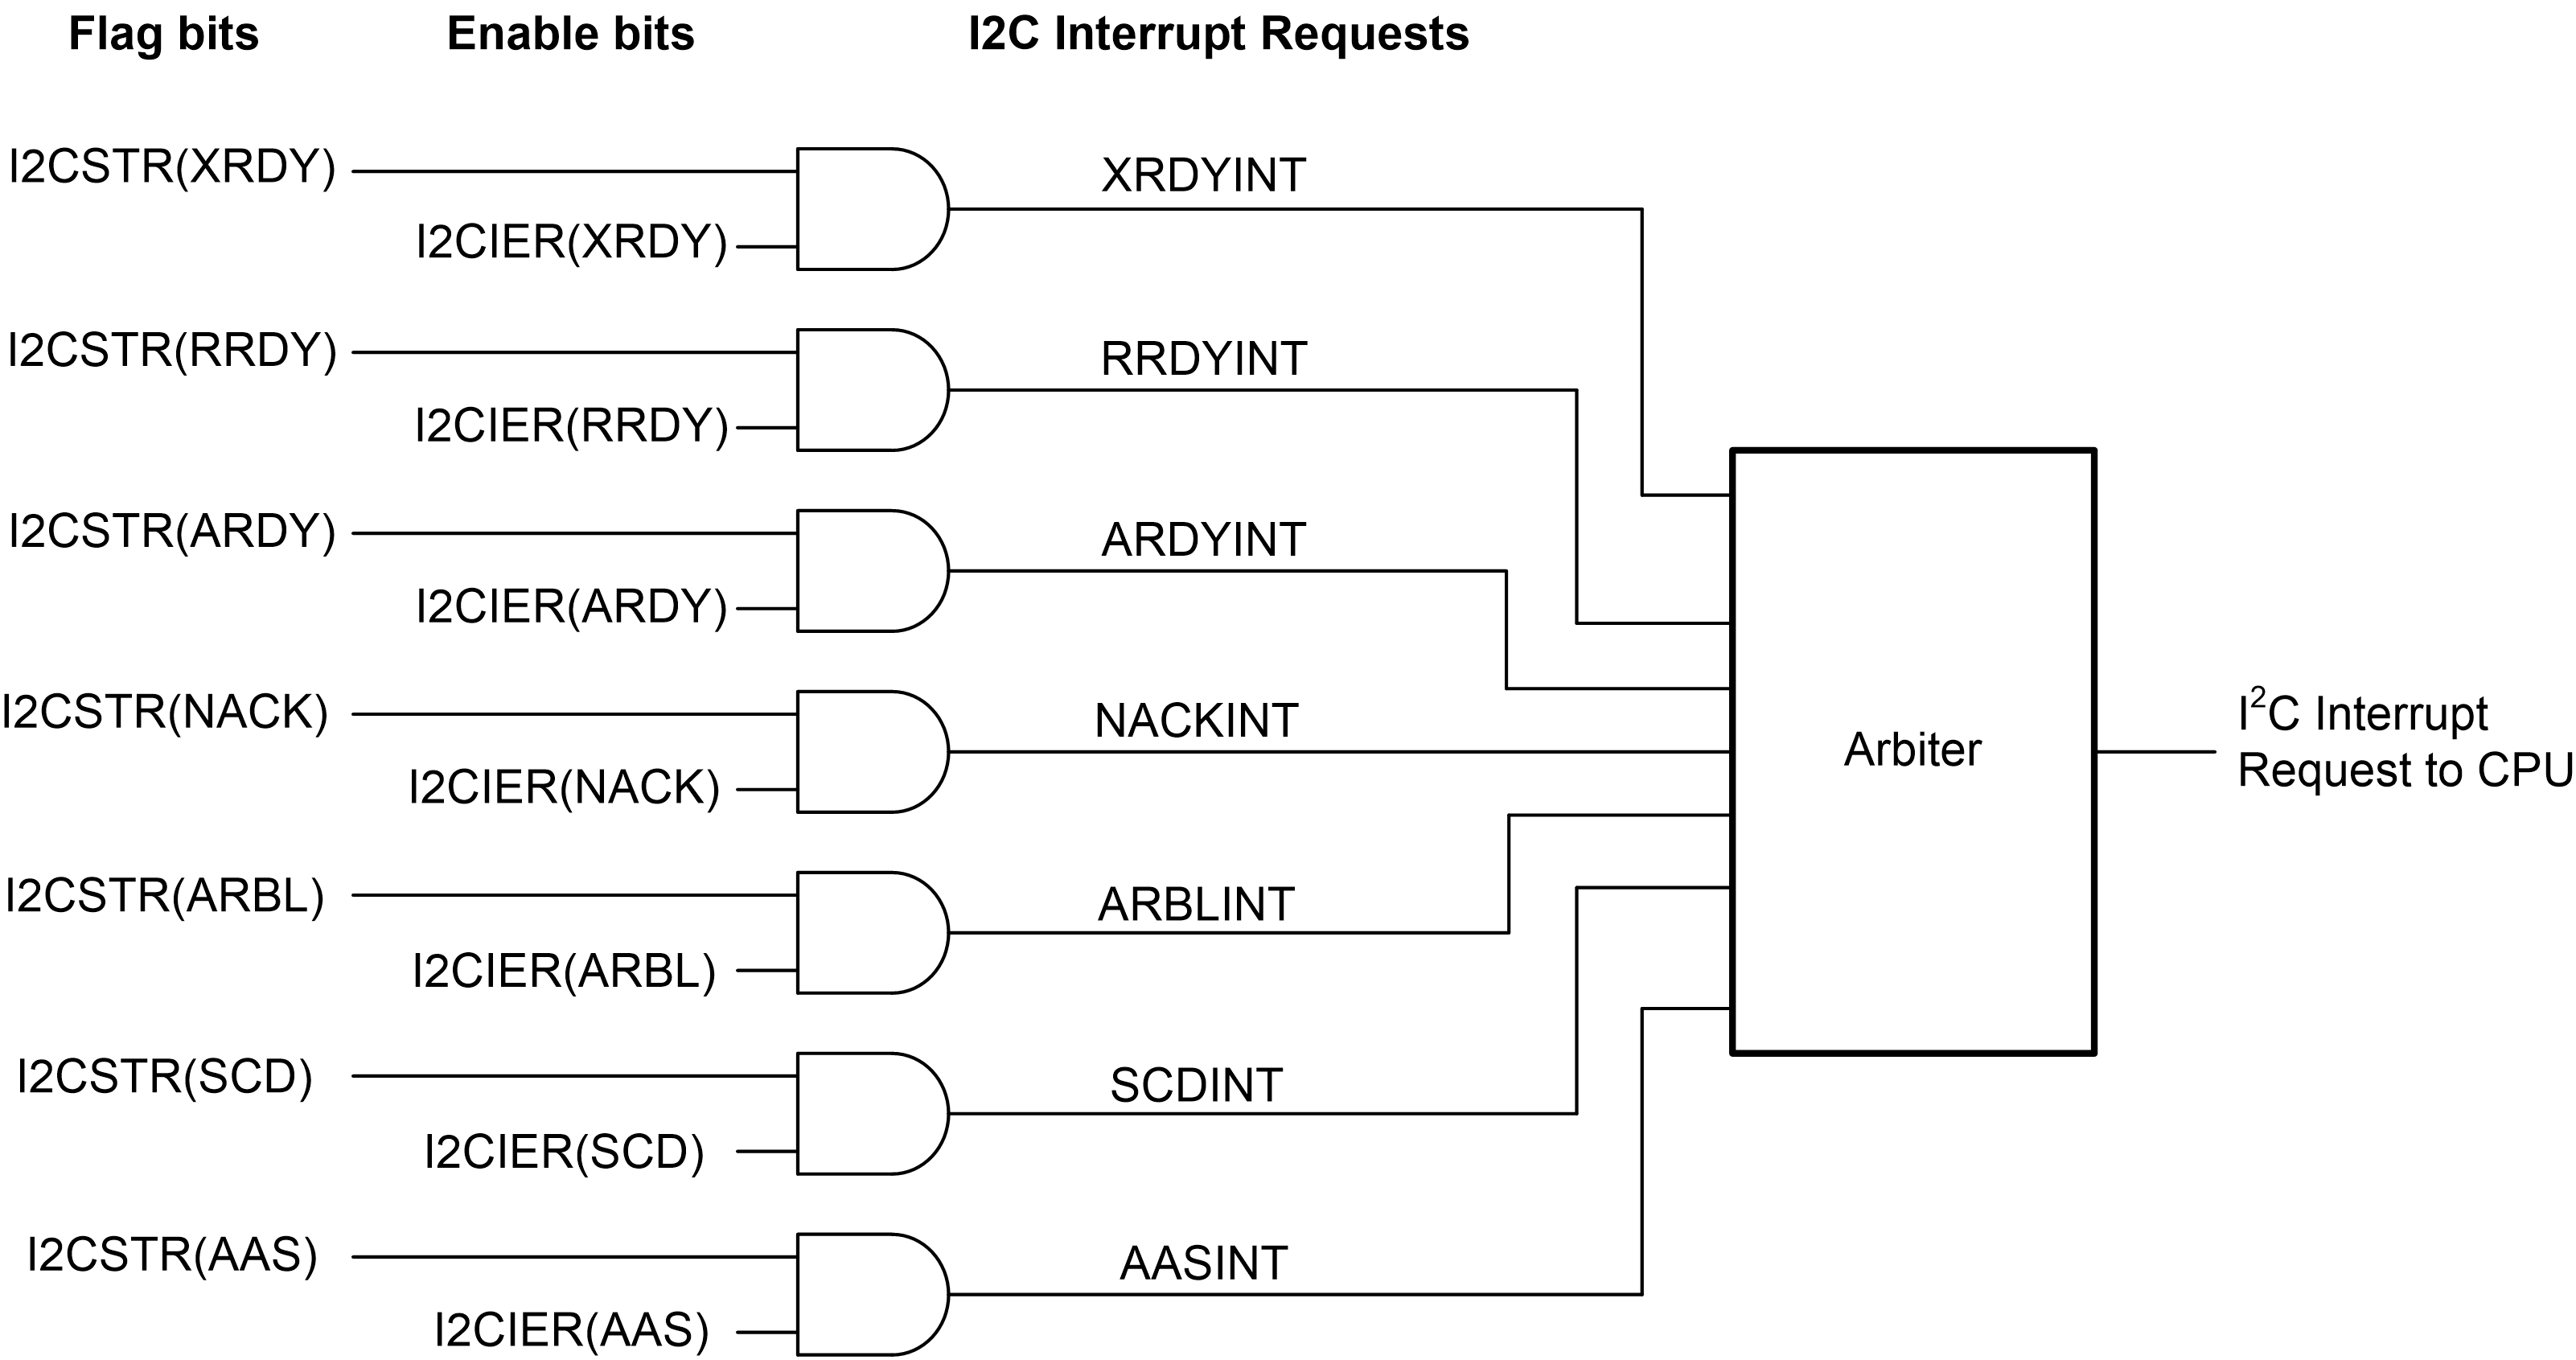  Enable
                    Paths of the I2C Interrupt Requests